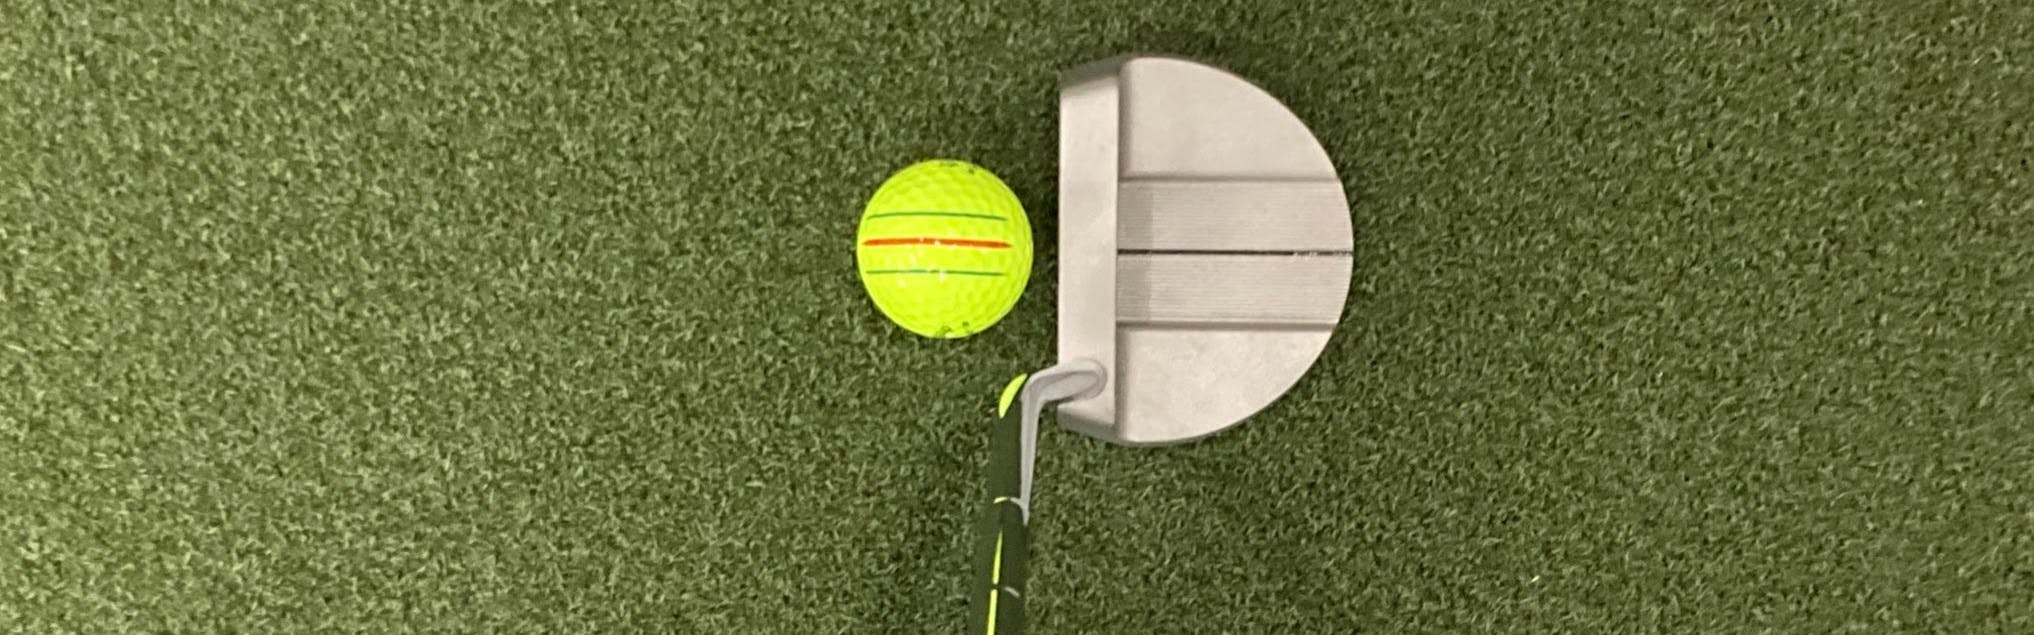 The Cleveland Huntington Beach SOFT #14 Single Bend Putter in front of a golf ball. 